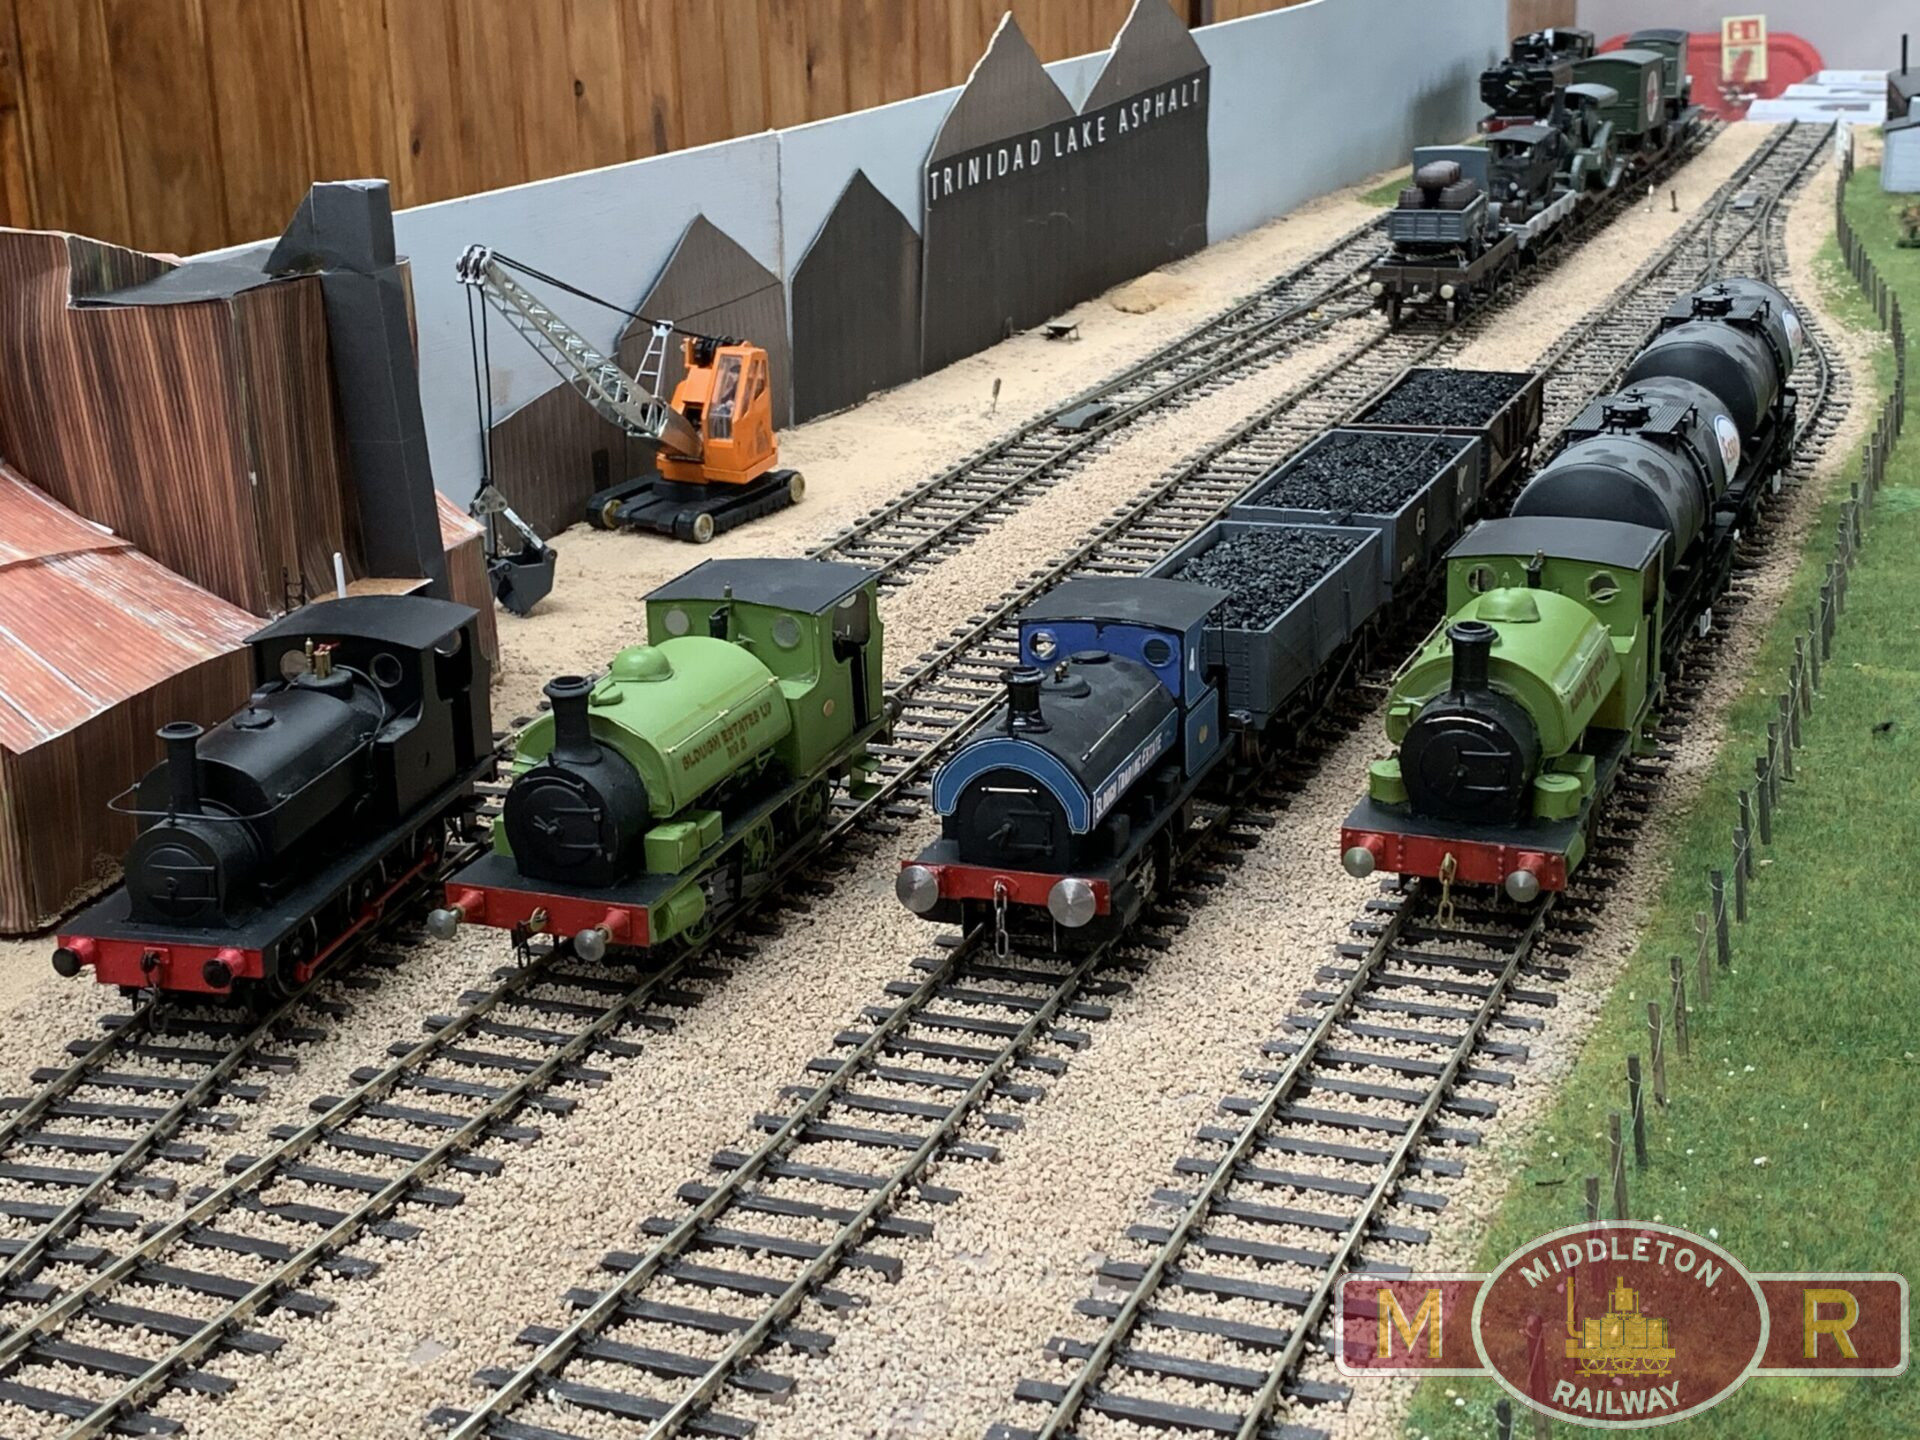 A view of a model railway